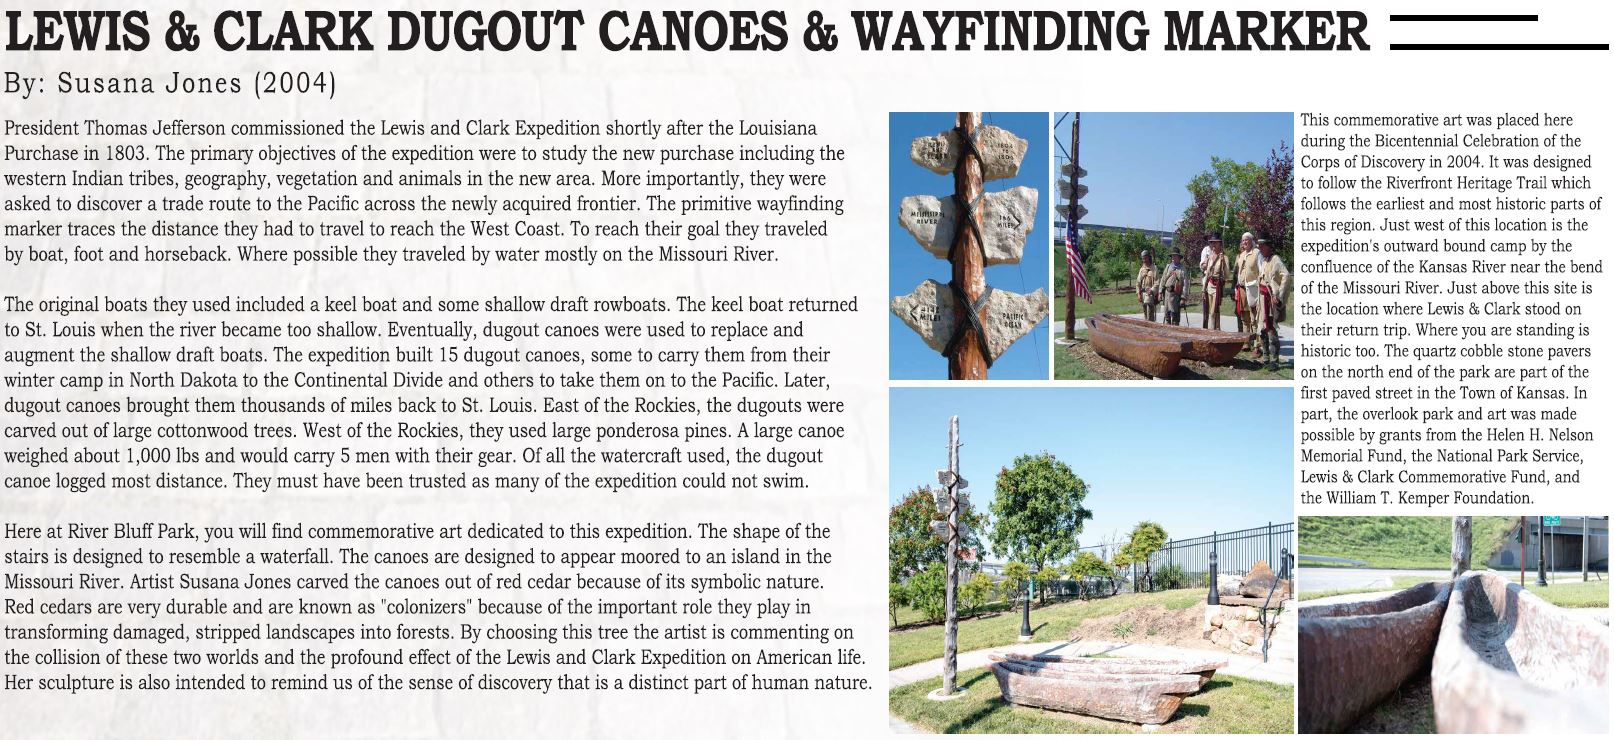 Lewis and Clark Dugout Canoes